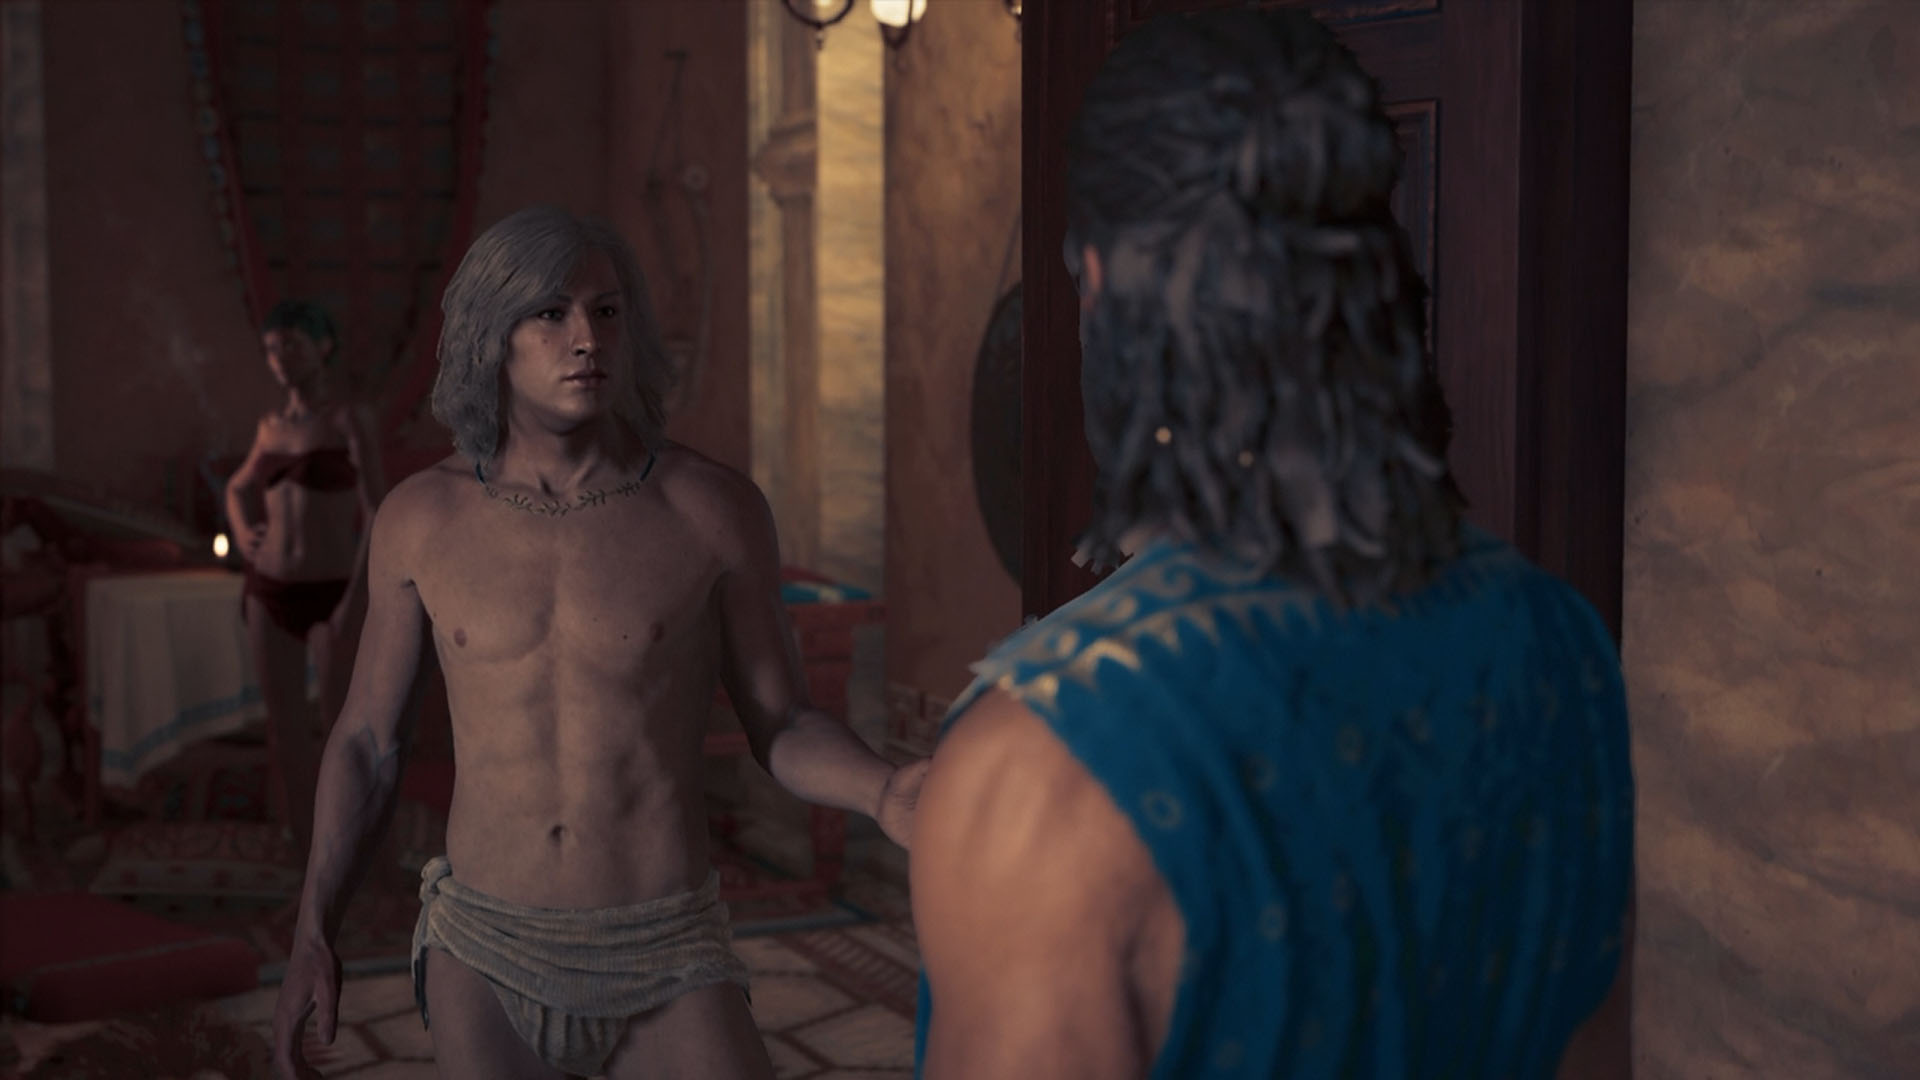 Assassins Creed Odyssey Porn - Assassin's Creed Odyssey Alkibiades Romance (Alexios) â€“ Naughty Gaming